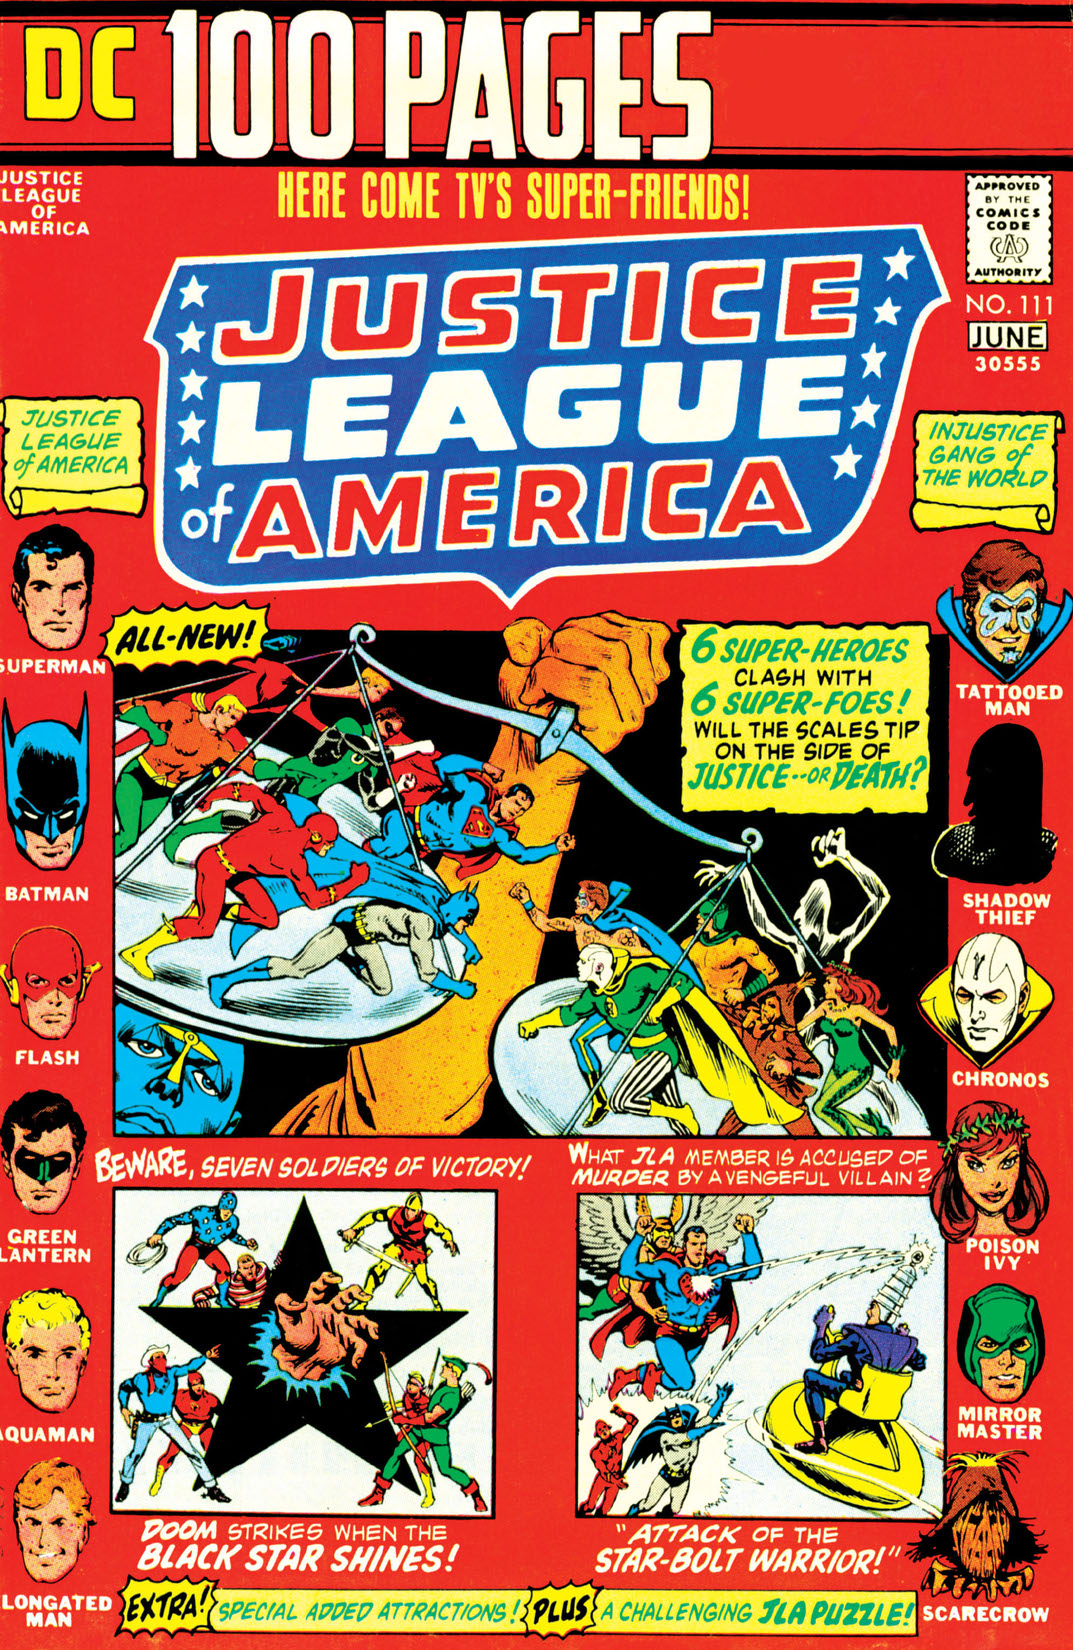 Justice League of America (1960-) #111 preview images